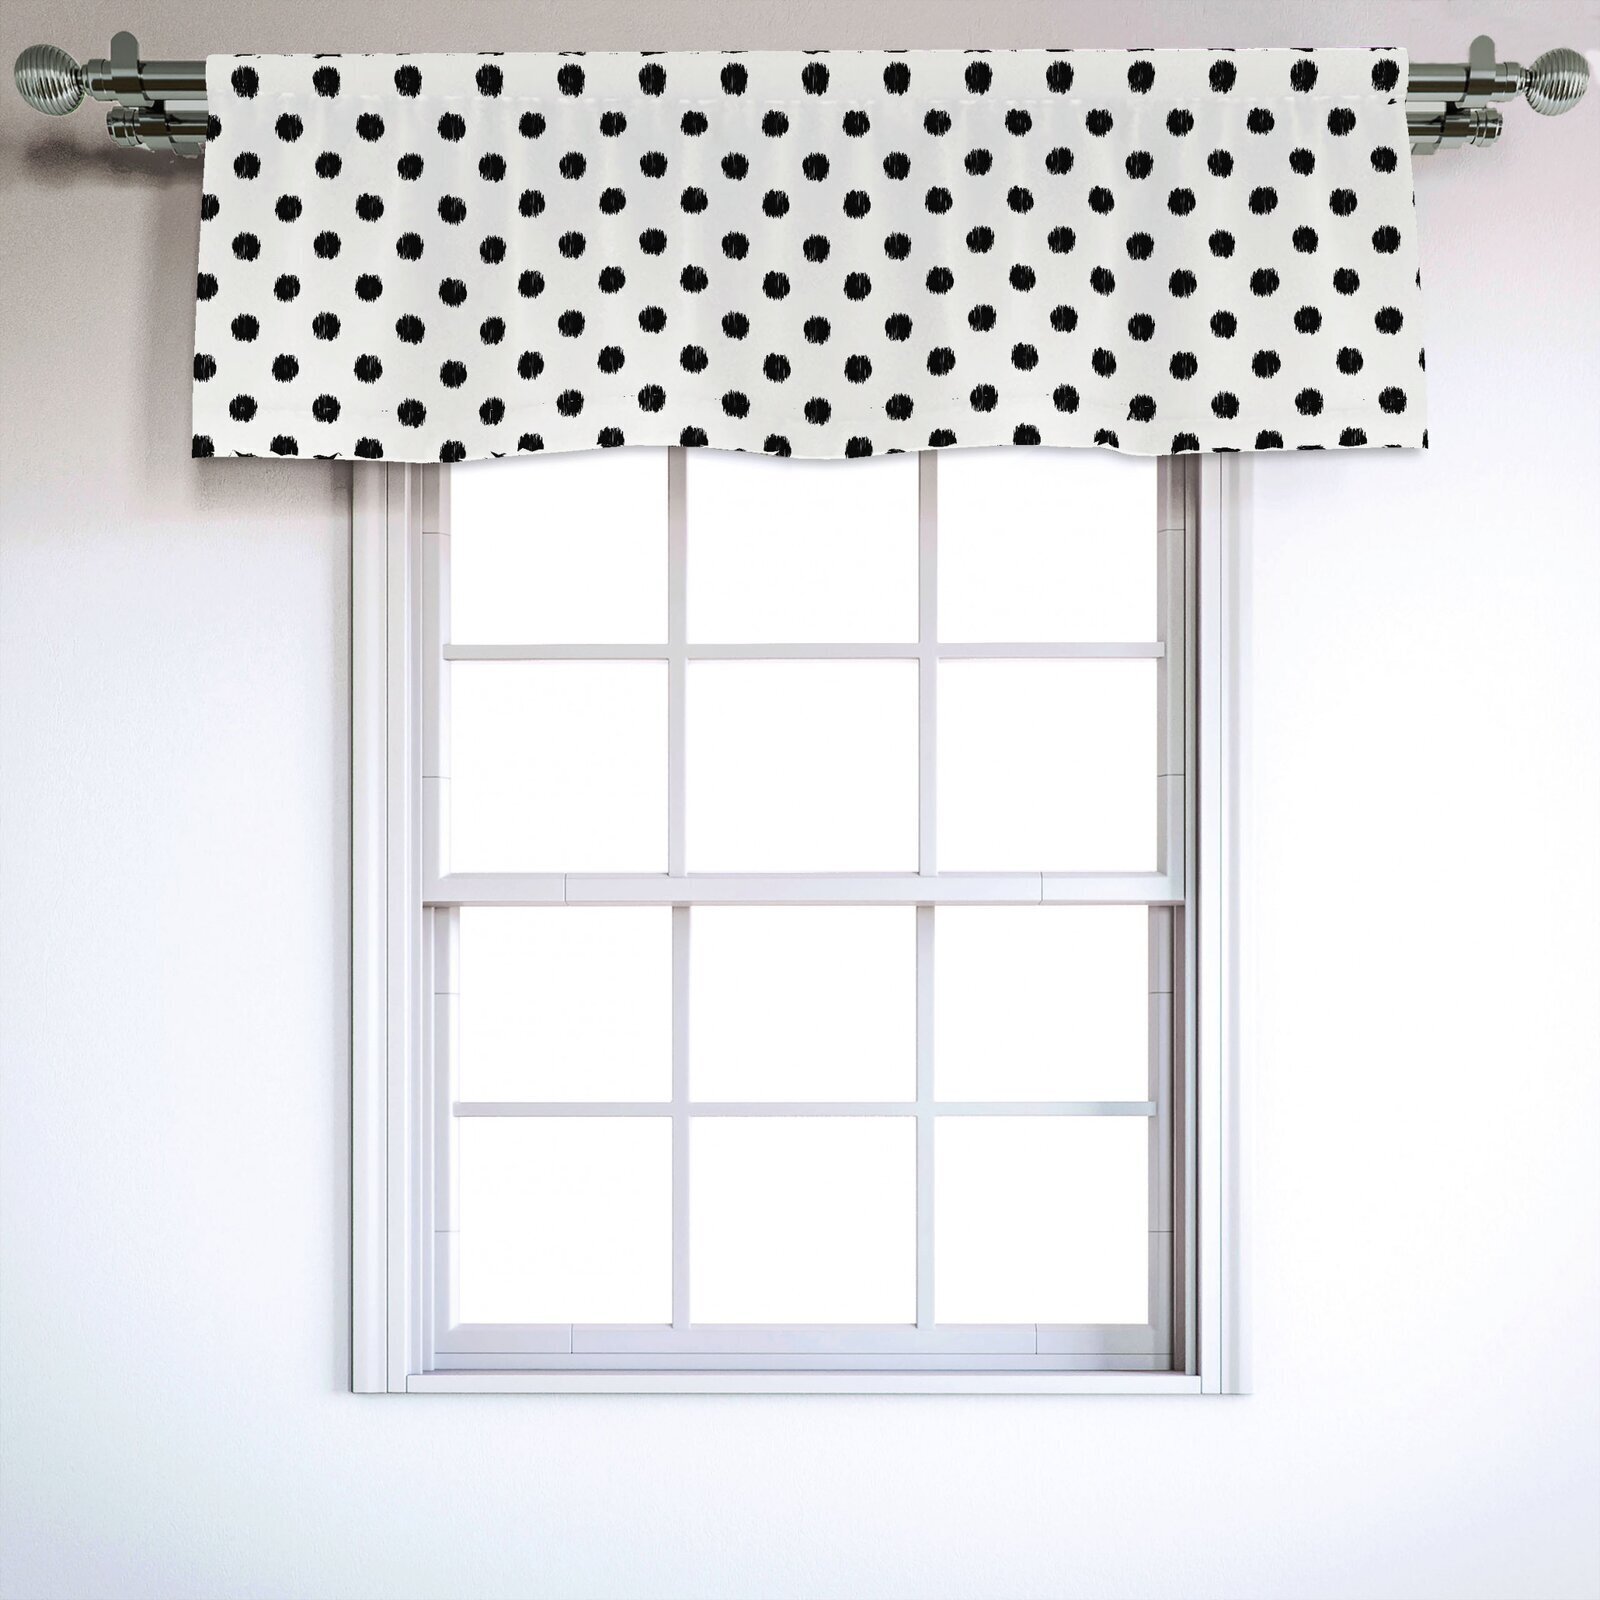 Sateen Black and White Valance for Kitchen